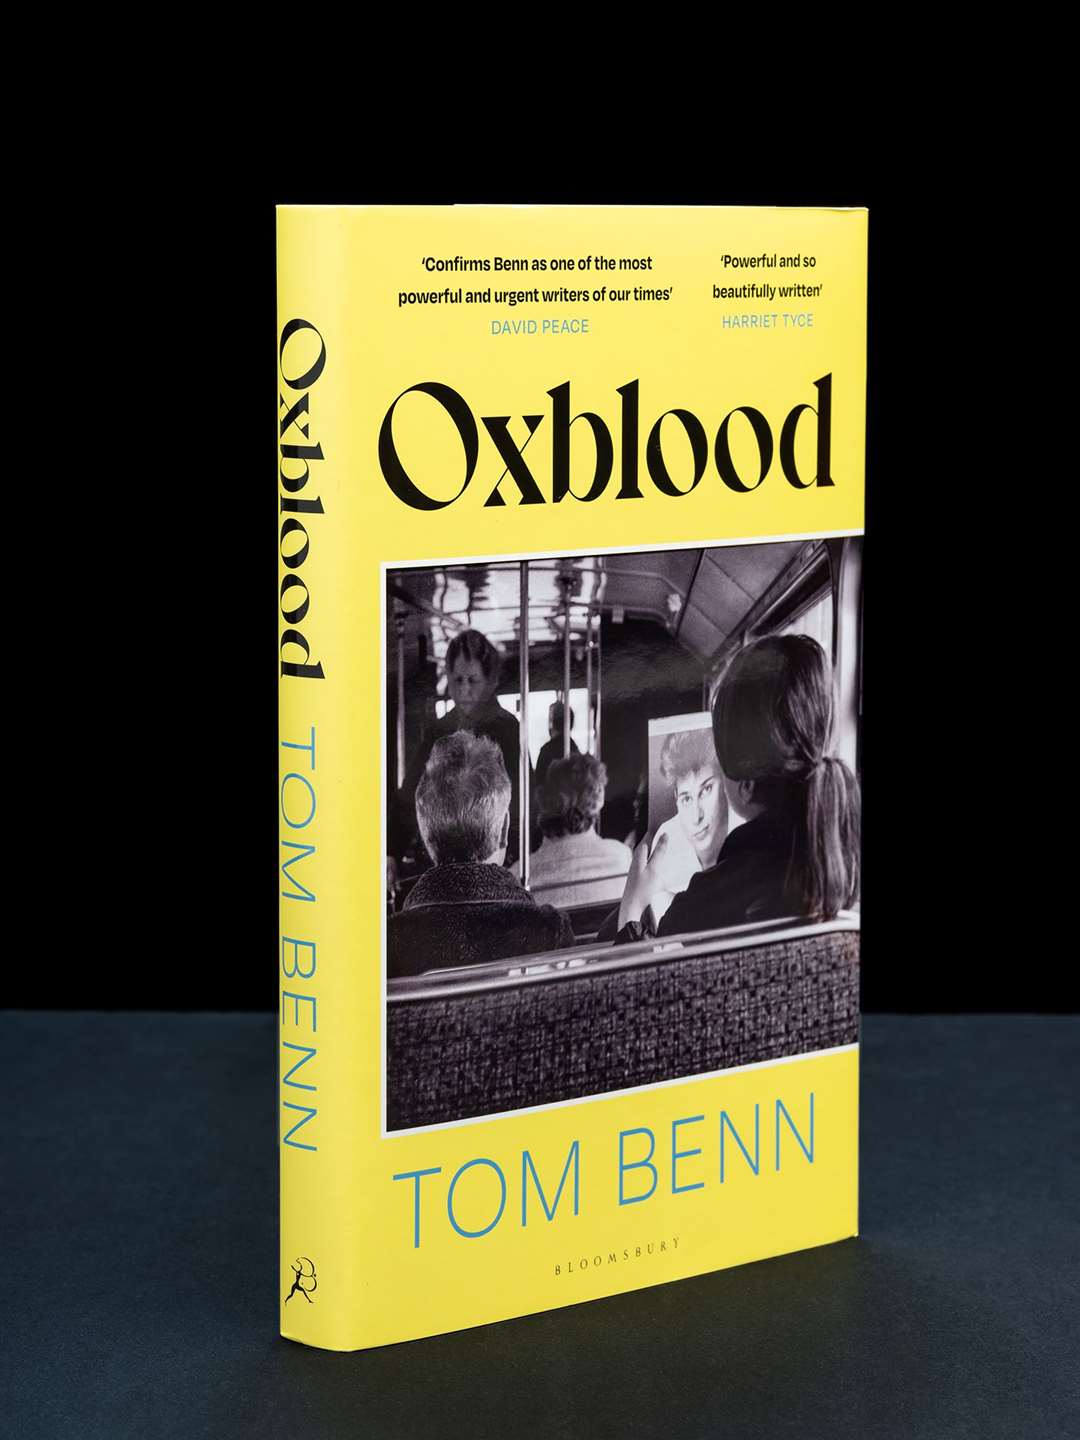 Tom Benn’s Oxblood is on the award shortlist (The Sunday Times Charlotte Aitken Young Writer Award/PA)